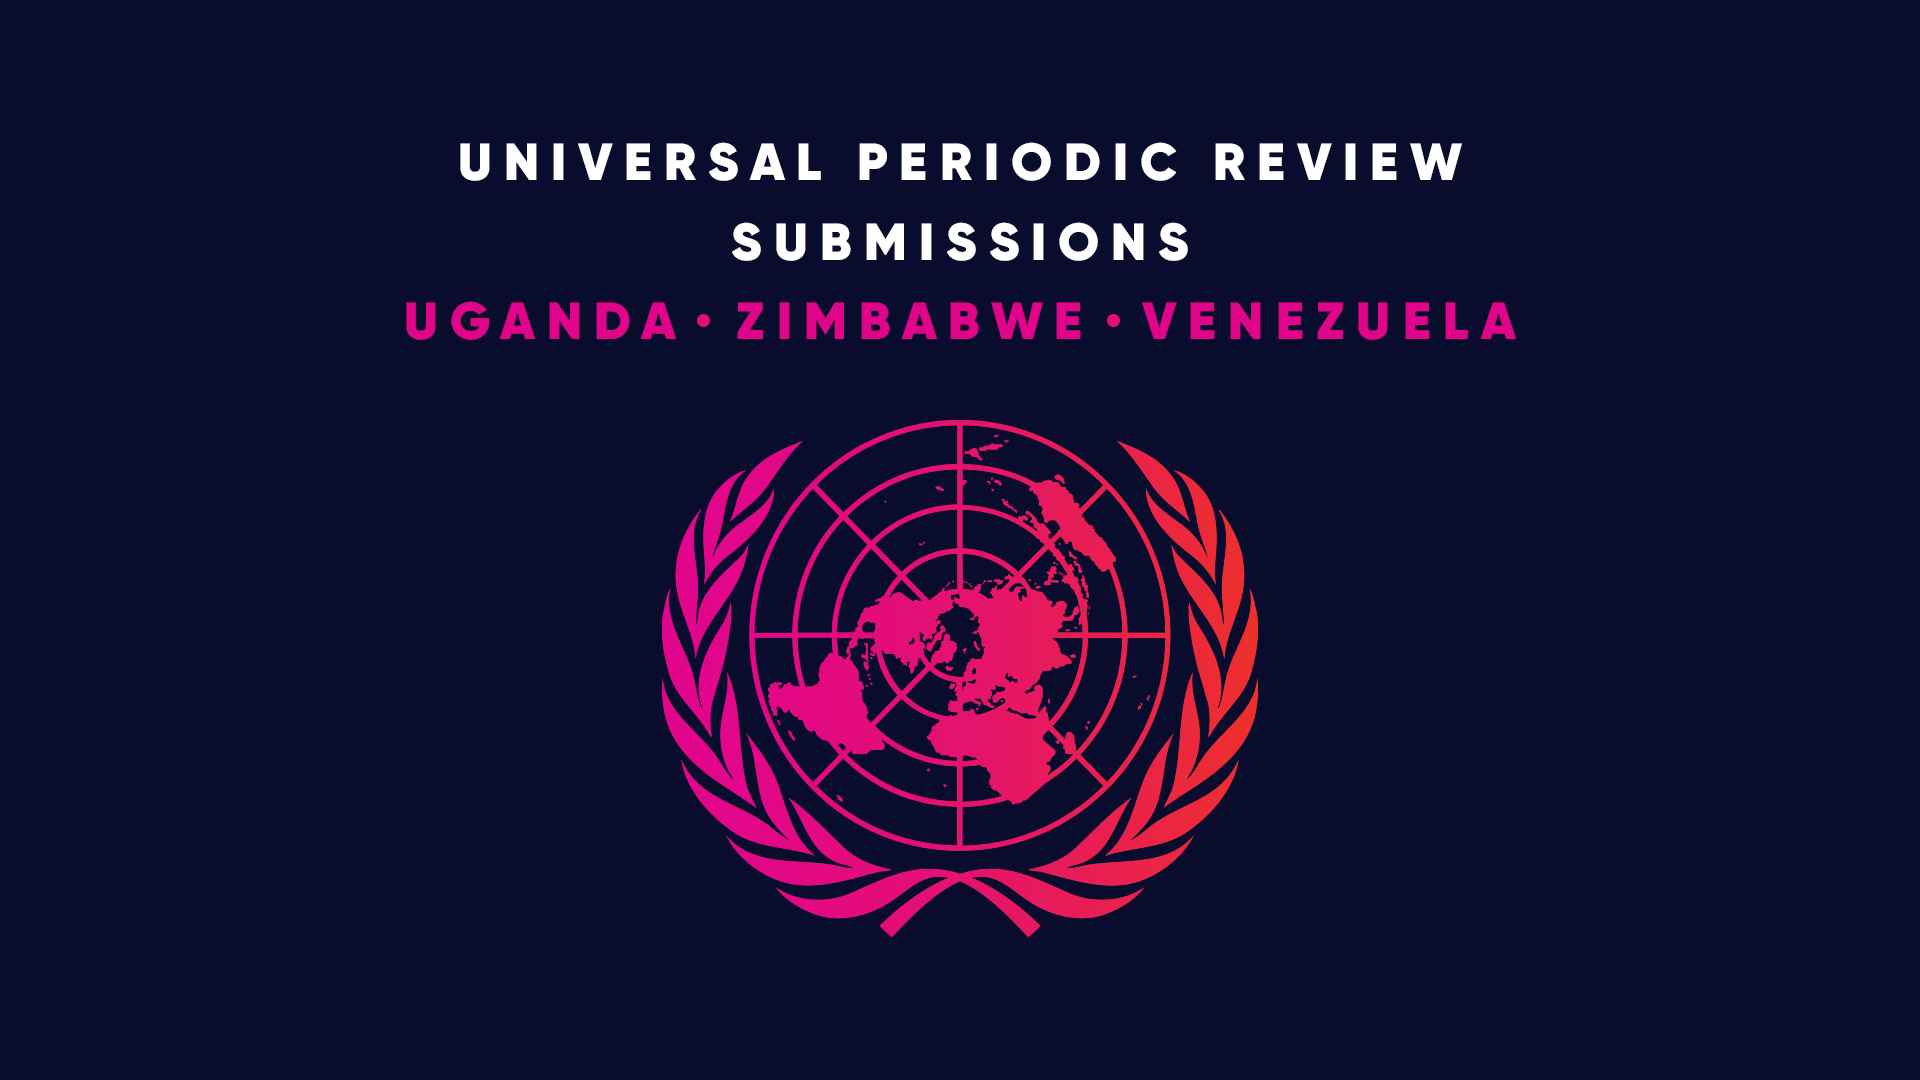 HRF Brings UN Attention to Rights Abuses in Venezuela, Uganda, and Zimbabwe